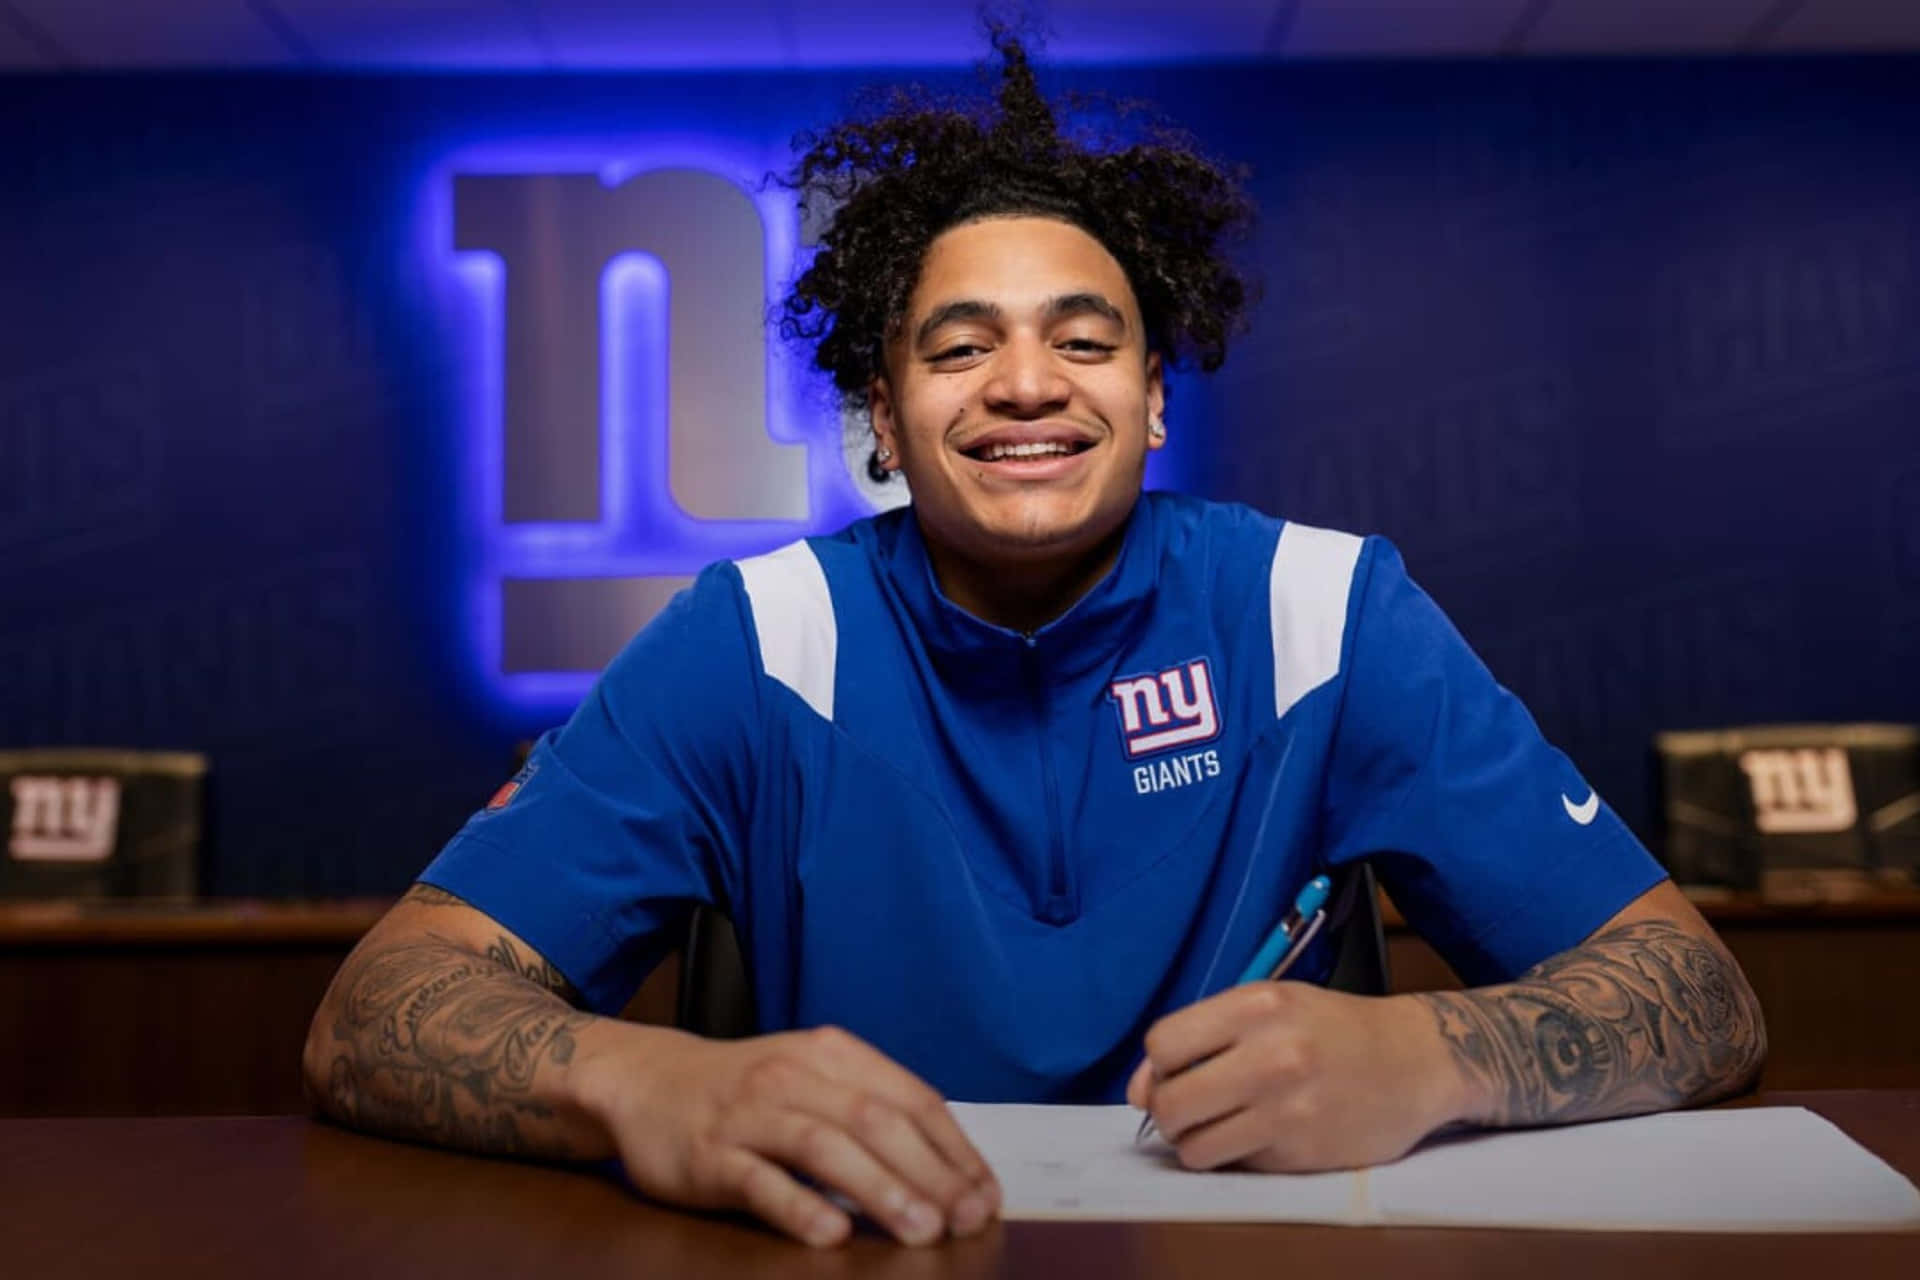 Athlete Signing Contractwith N Y Giants Wallpaper